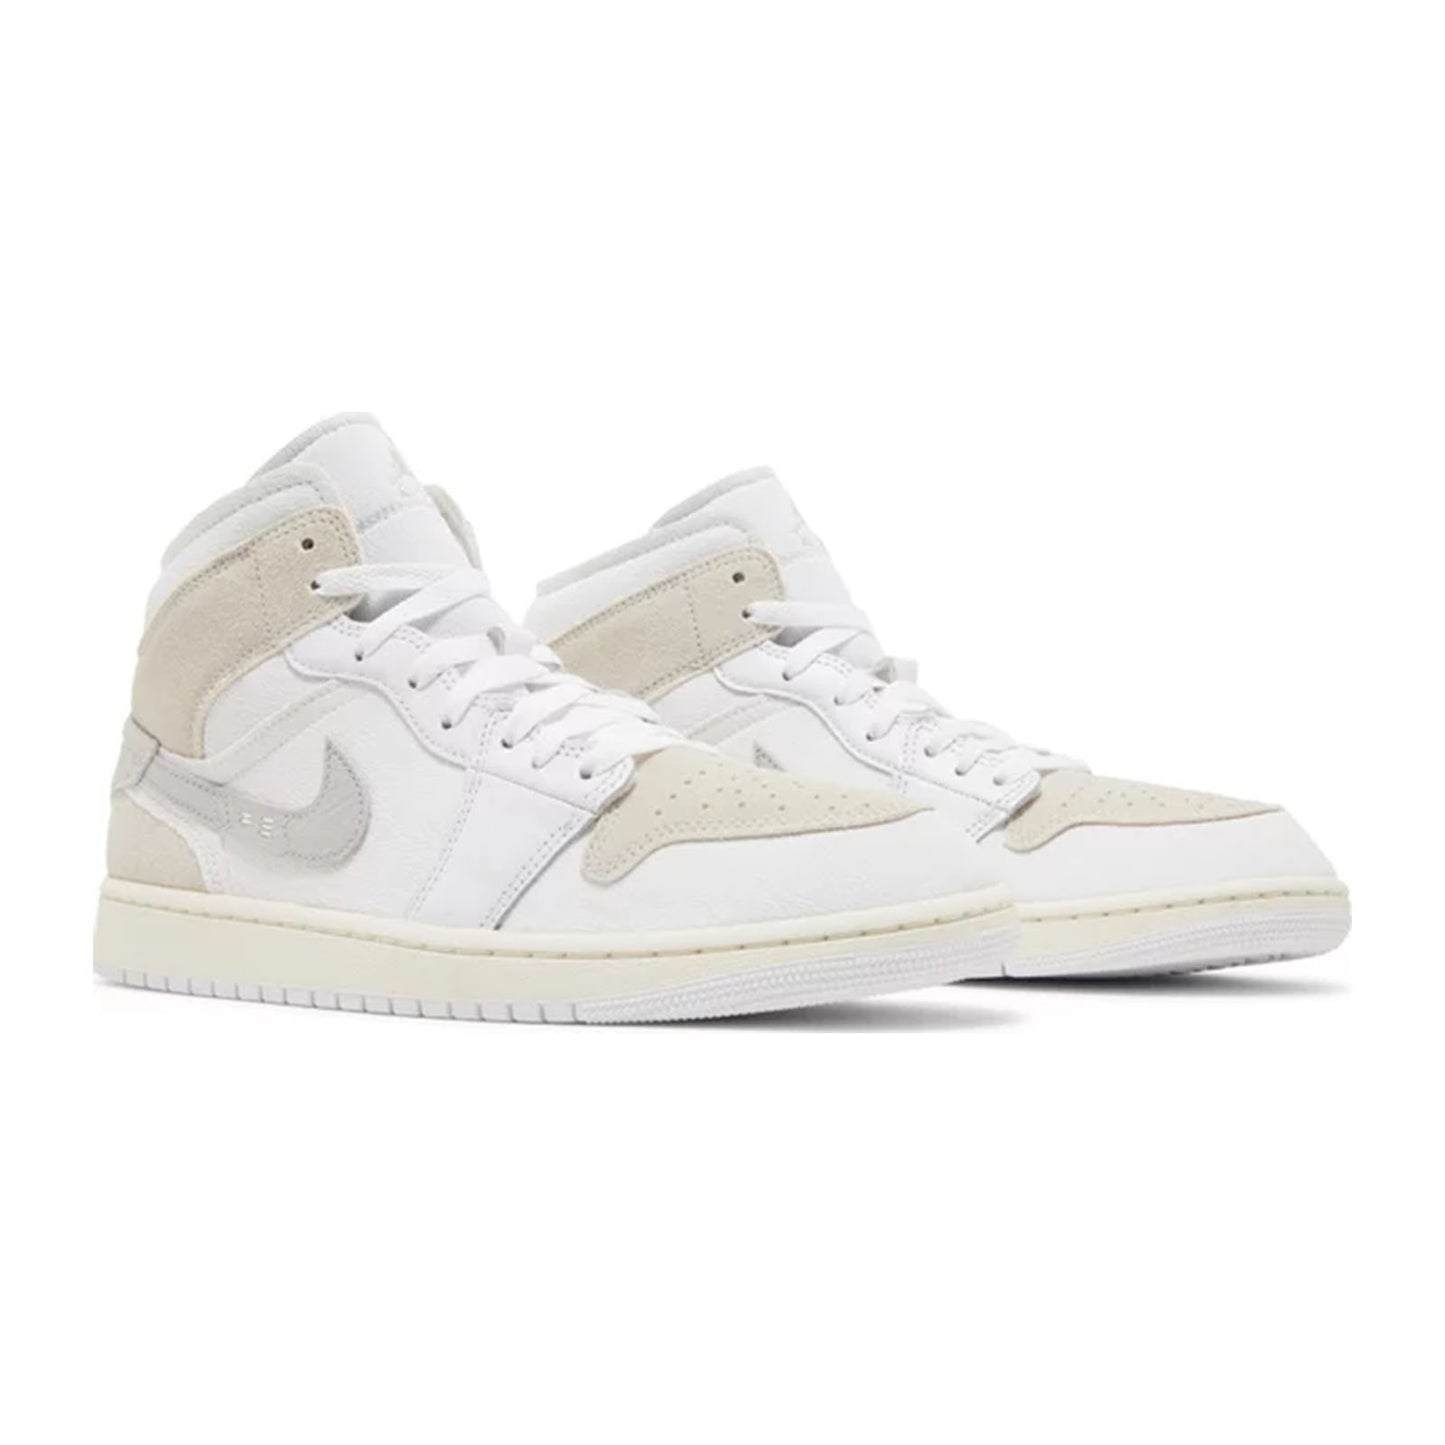 Air Jordan 1 Mid (PS), SE Craft Inside Out White Sail